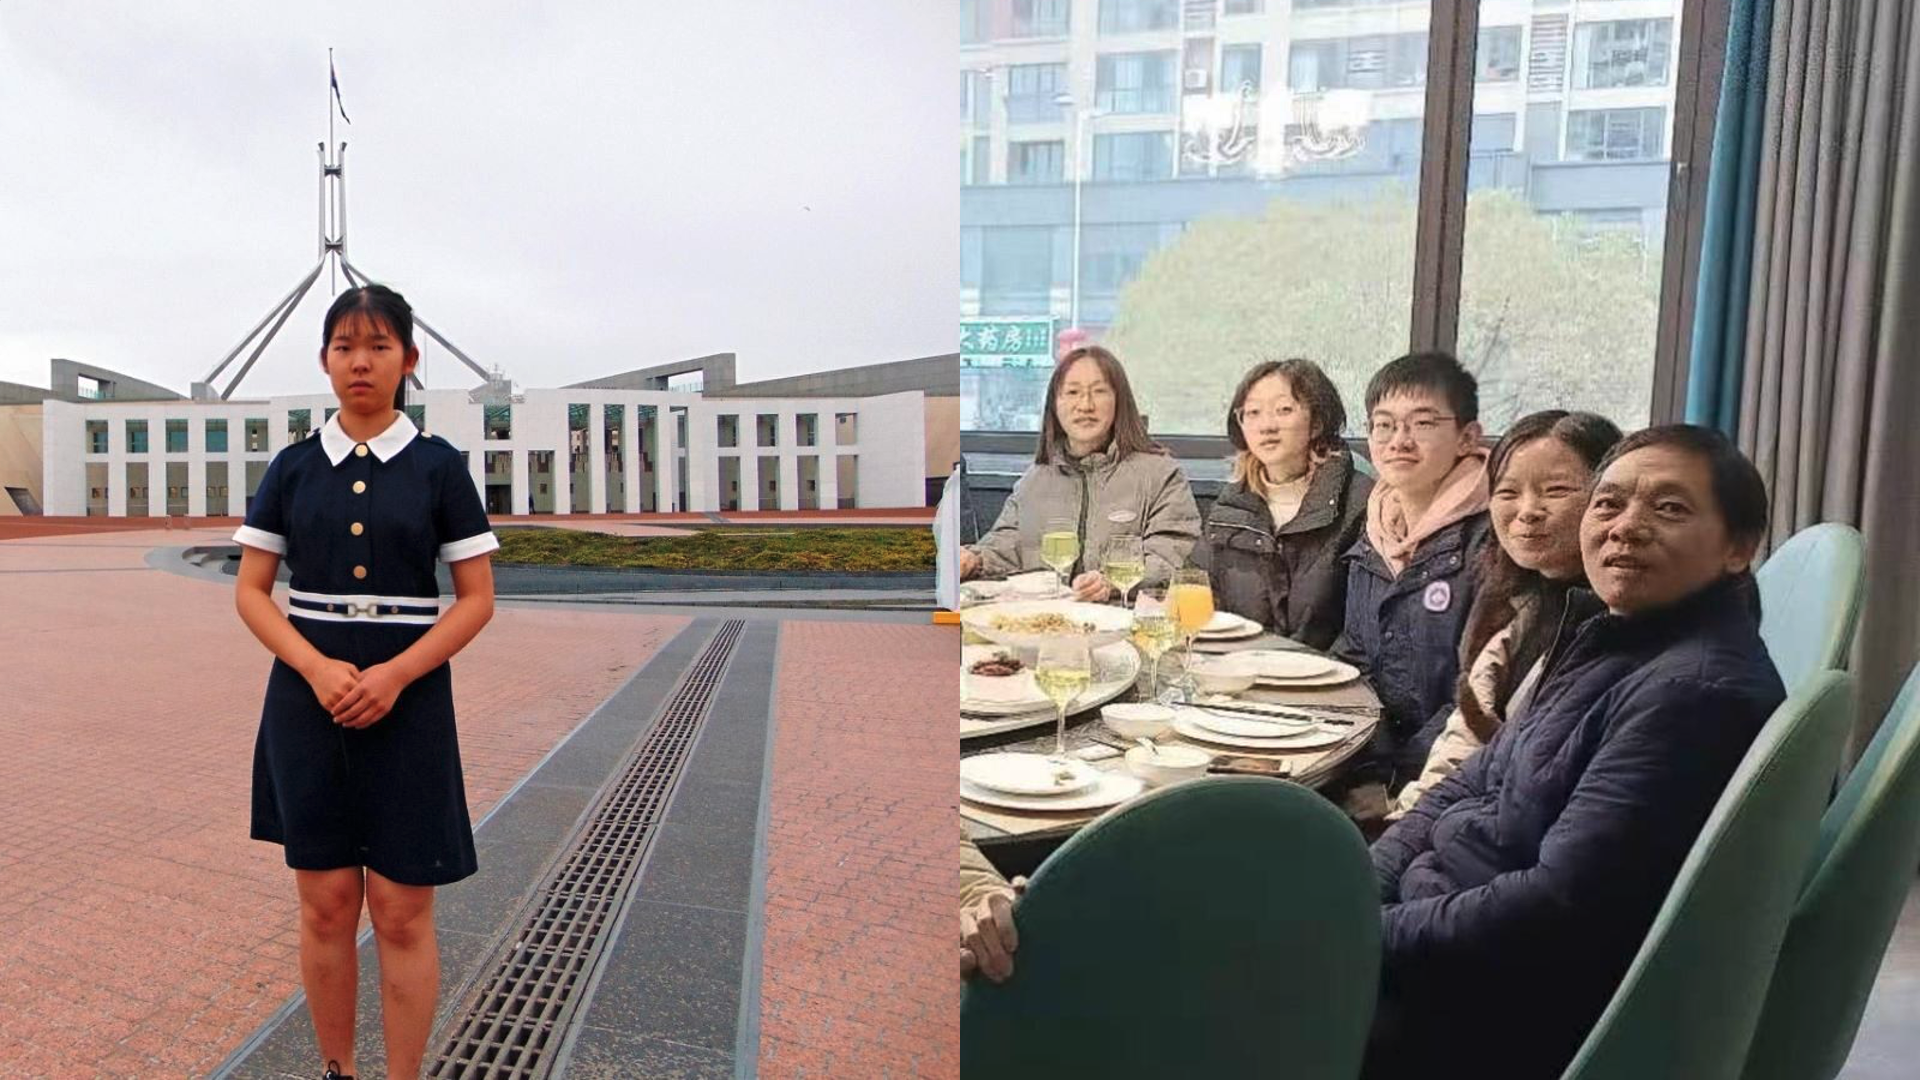 Left: Leah Guo traveled to the Parliament House in Canberra to request officials for help to release her parents. Right: Leah Guo’s parents Huang Yiqin and Guo Xiaoyun (front).